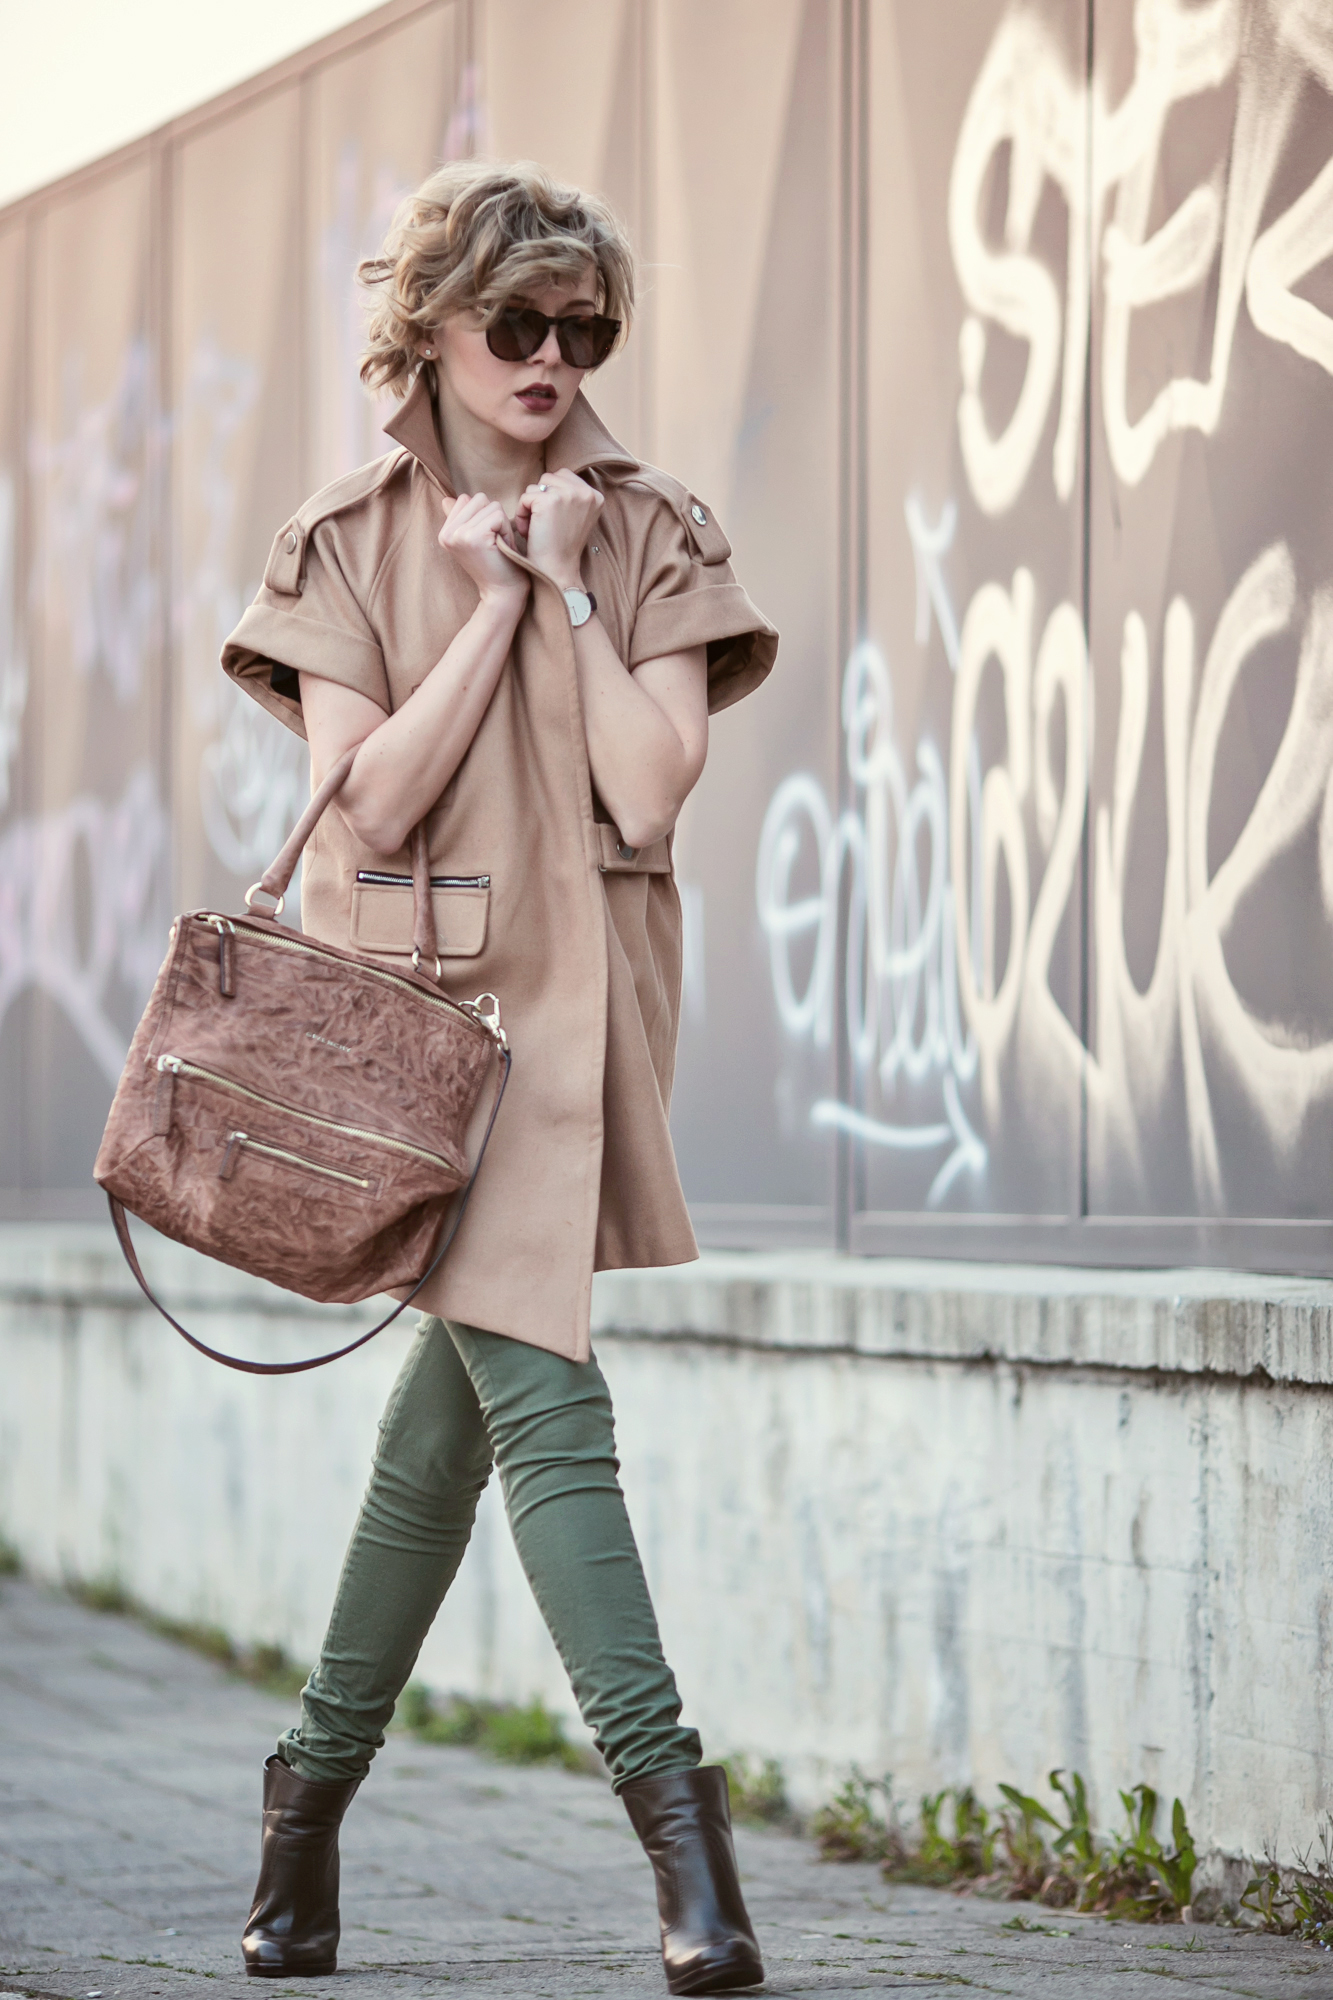 darya kamalova from thecablook com is doing a street style outfit wearing chicwish sleveless coat and givenchy pandora bag with tory burch booties ans asos green skinny pants on the sunset-22 copy